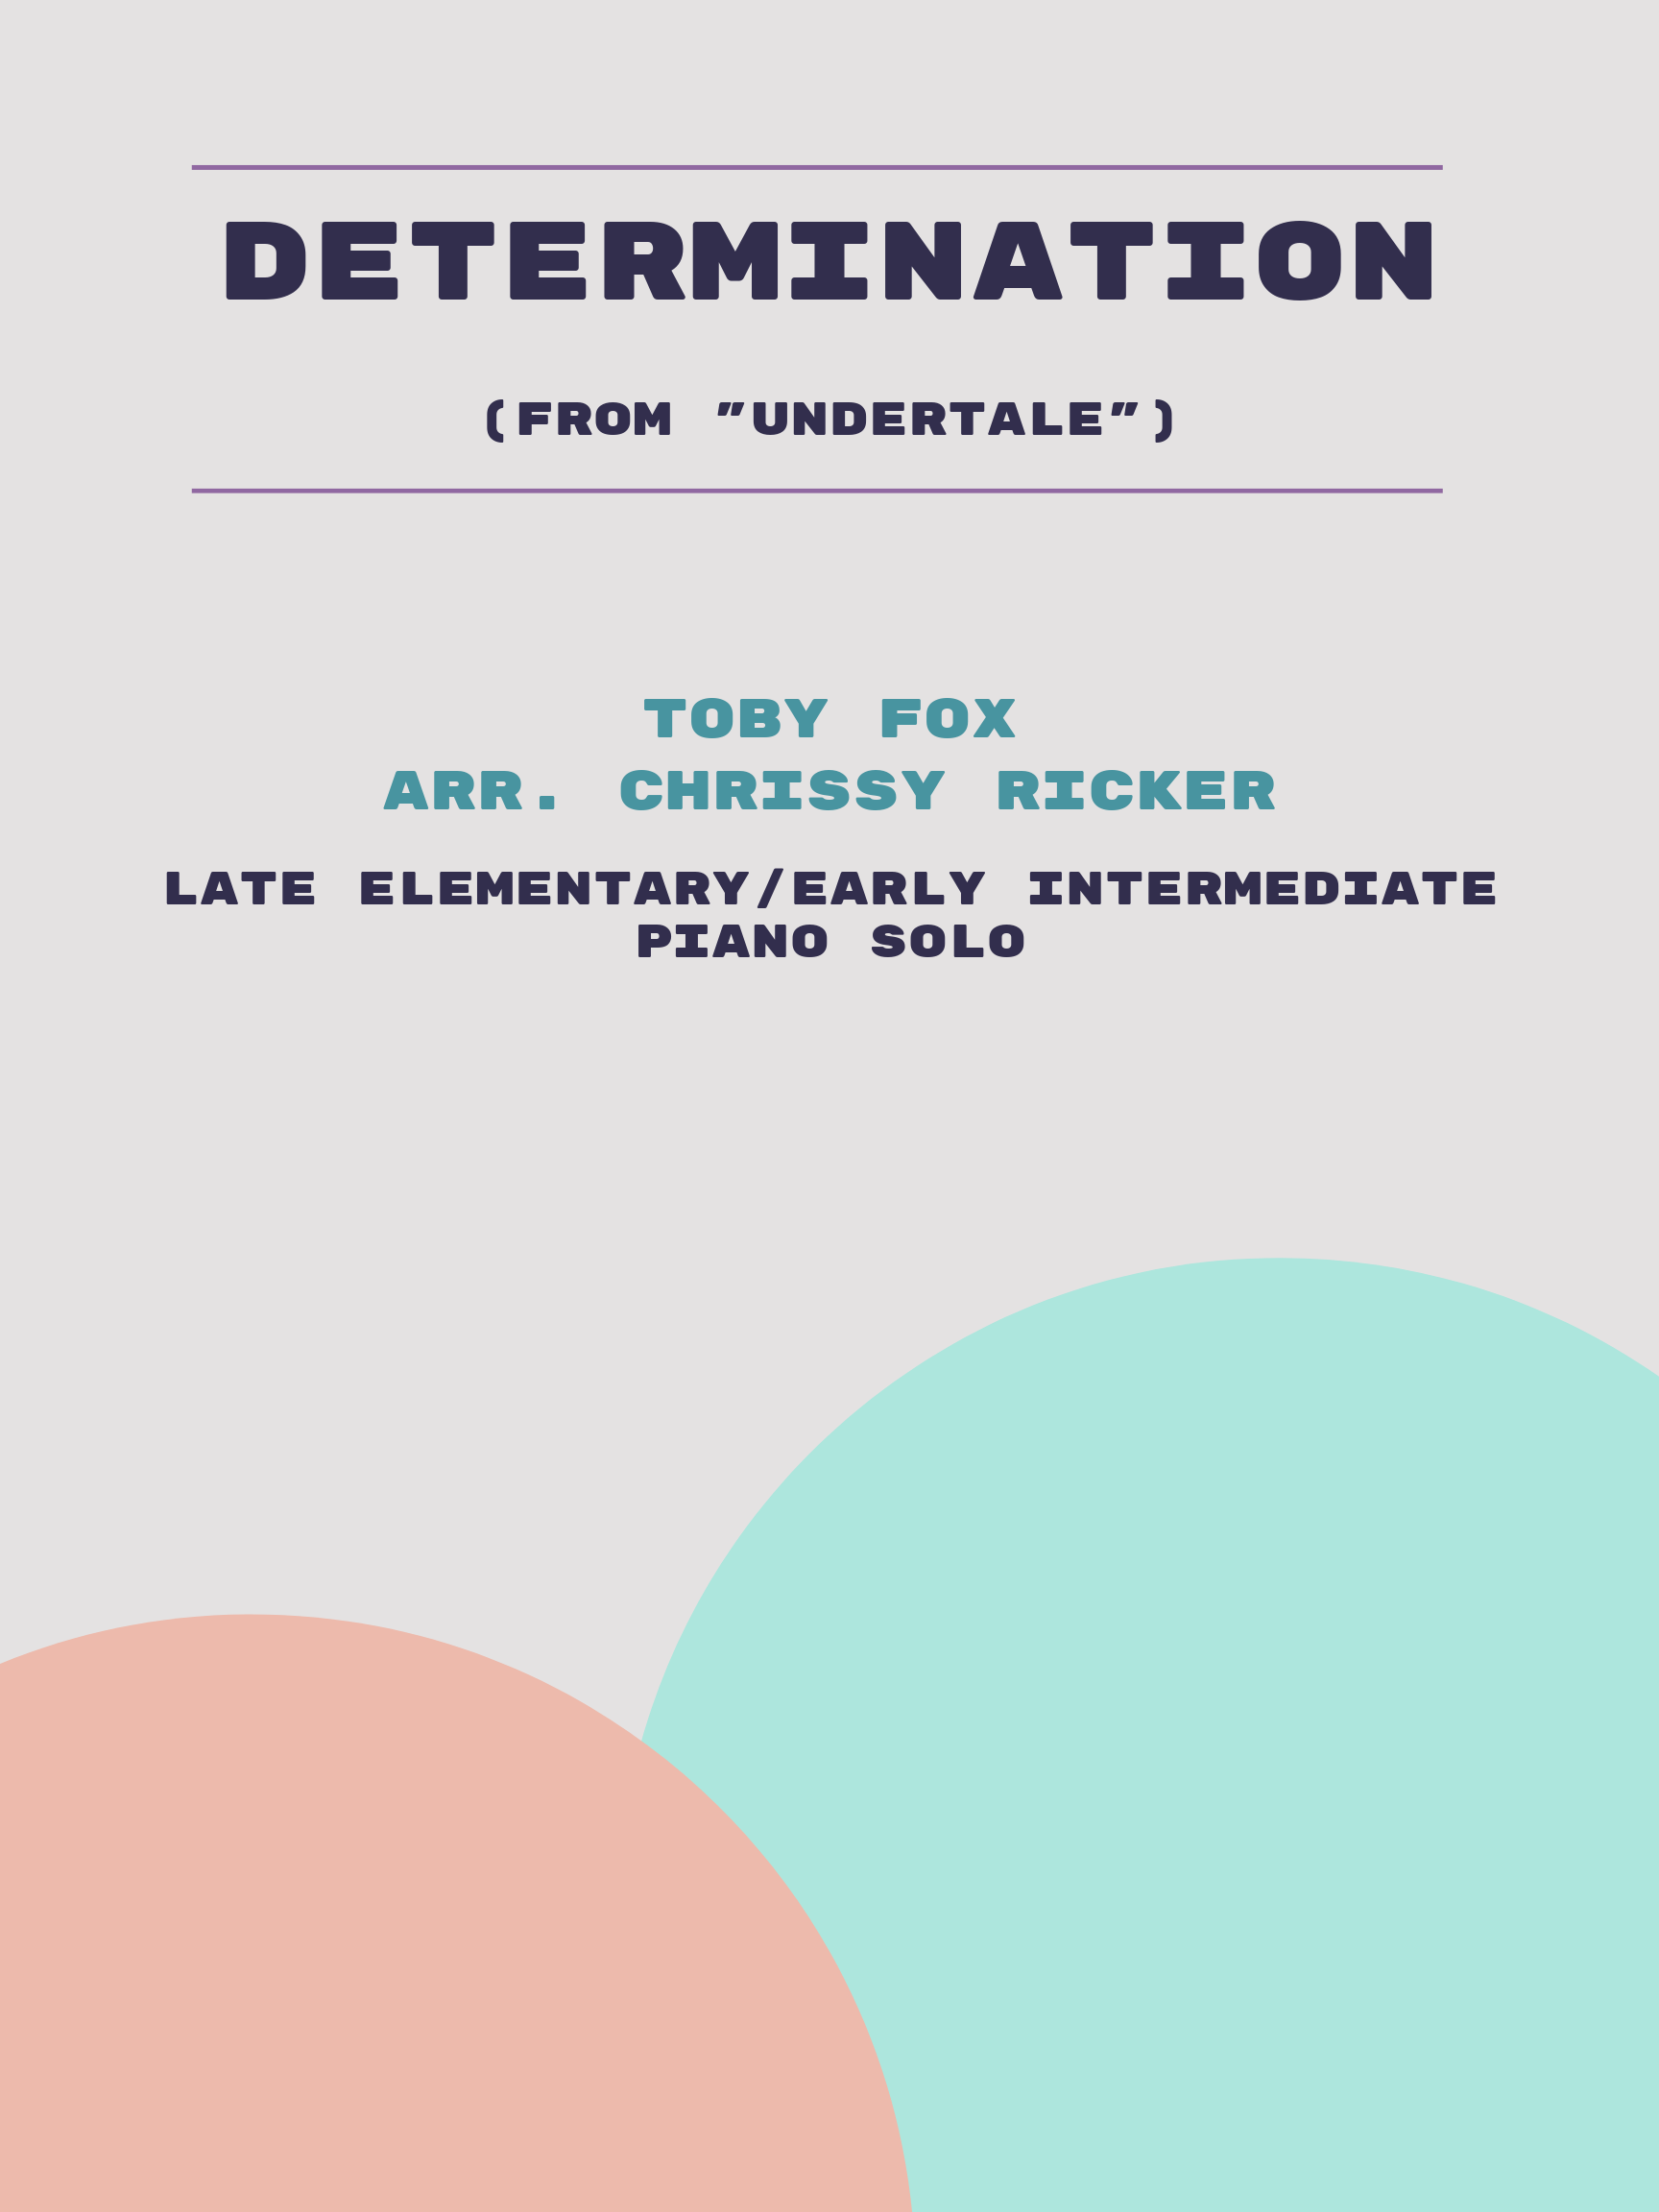 Determination by Toby Fox